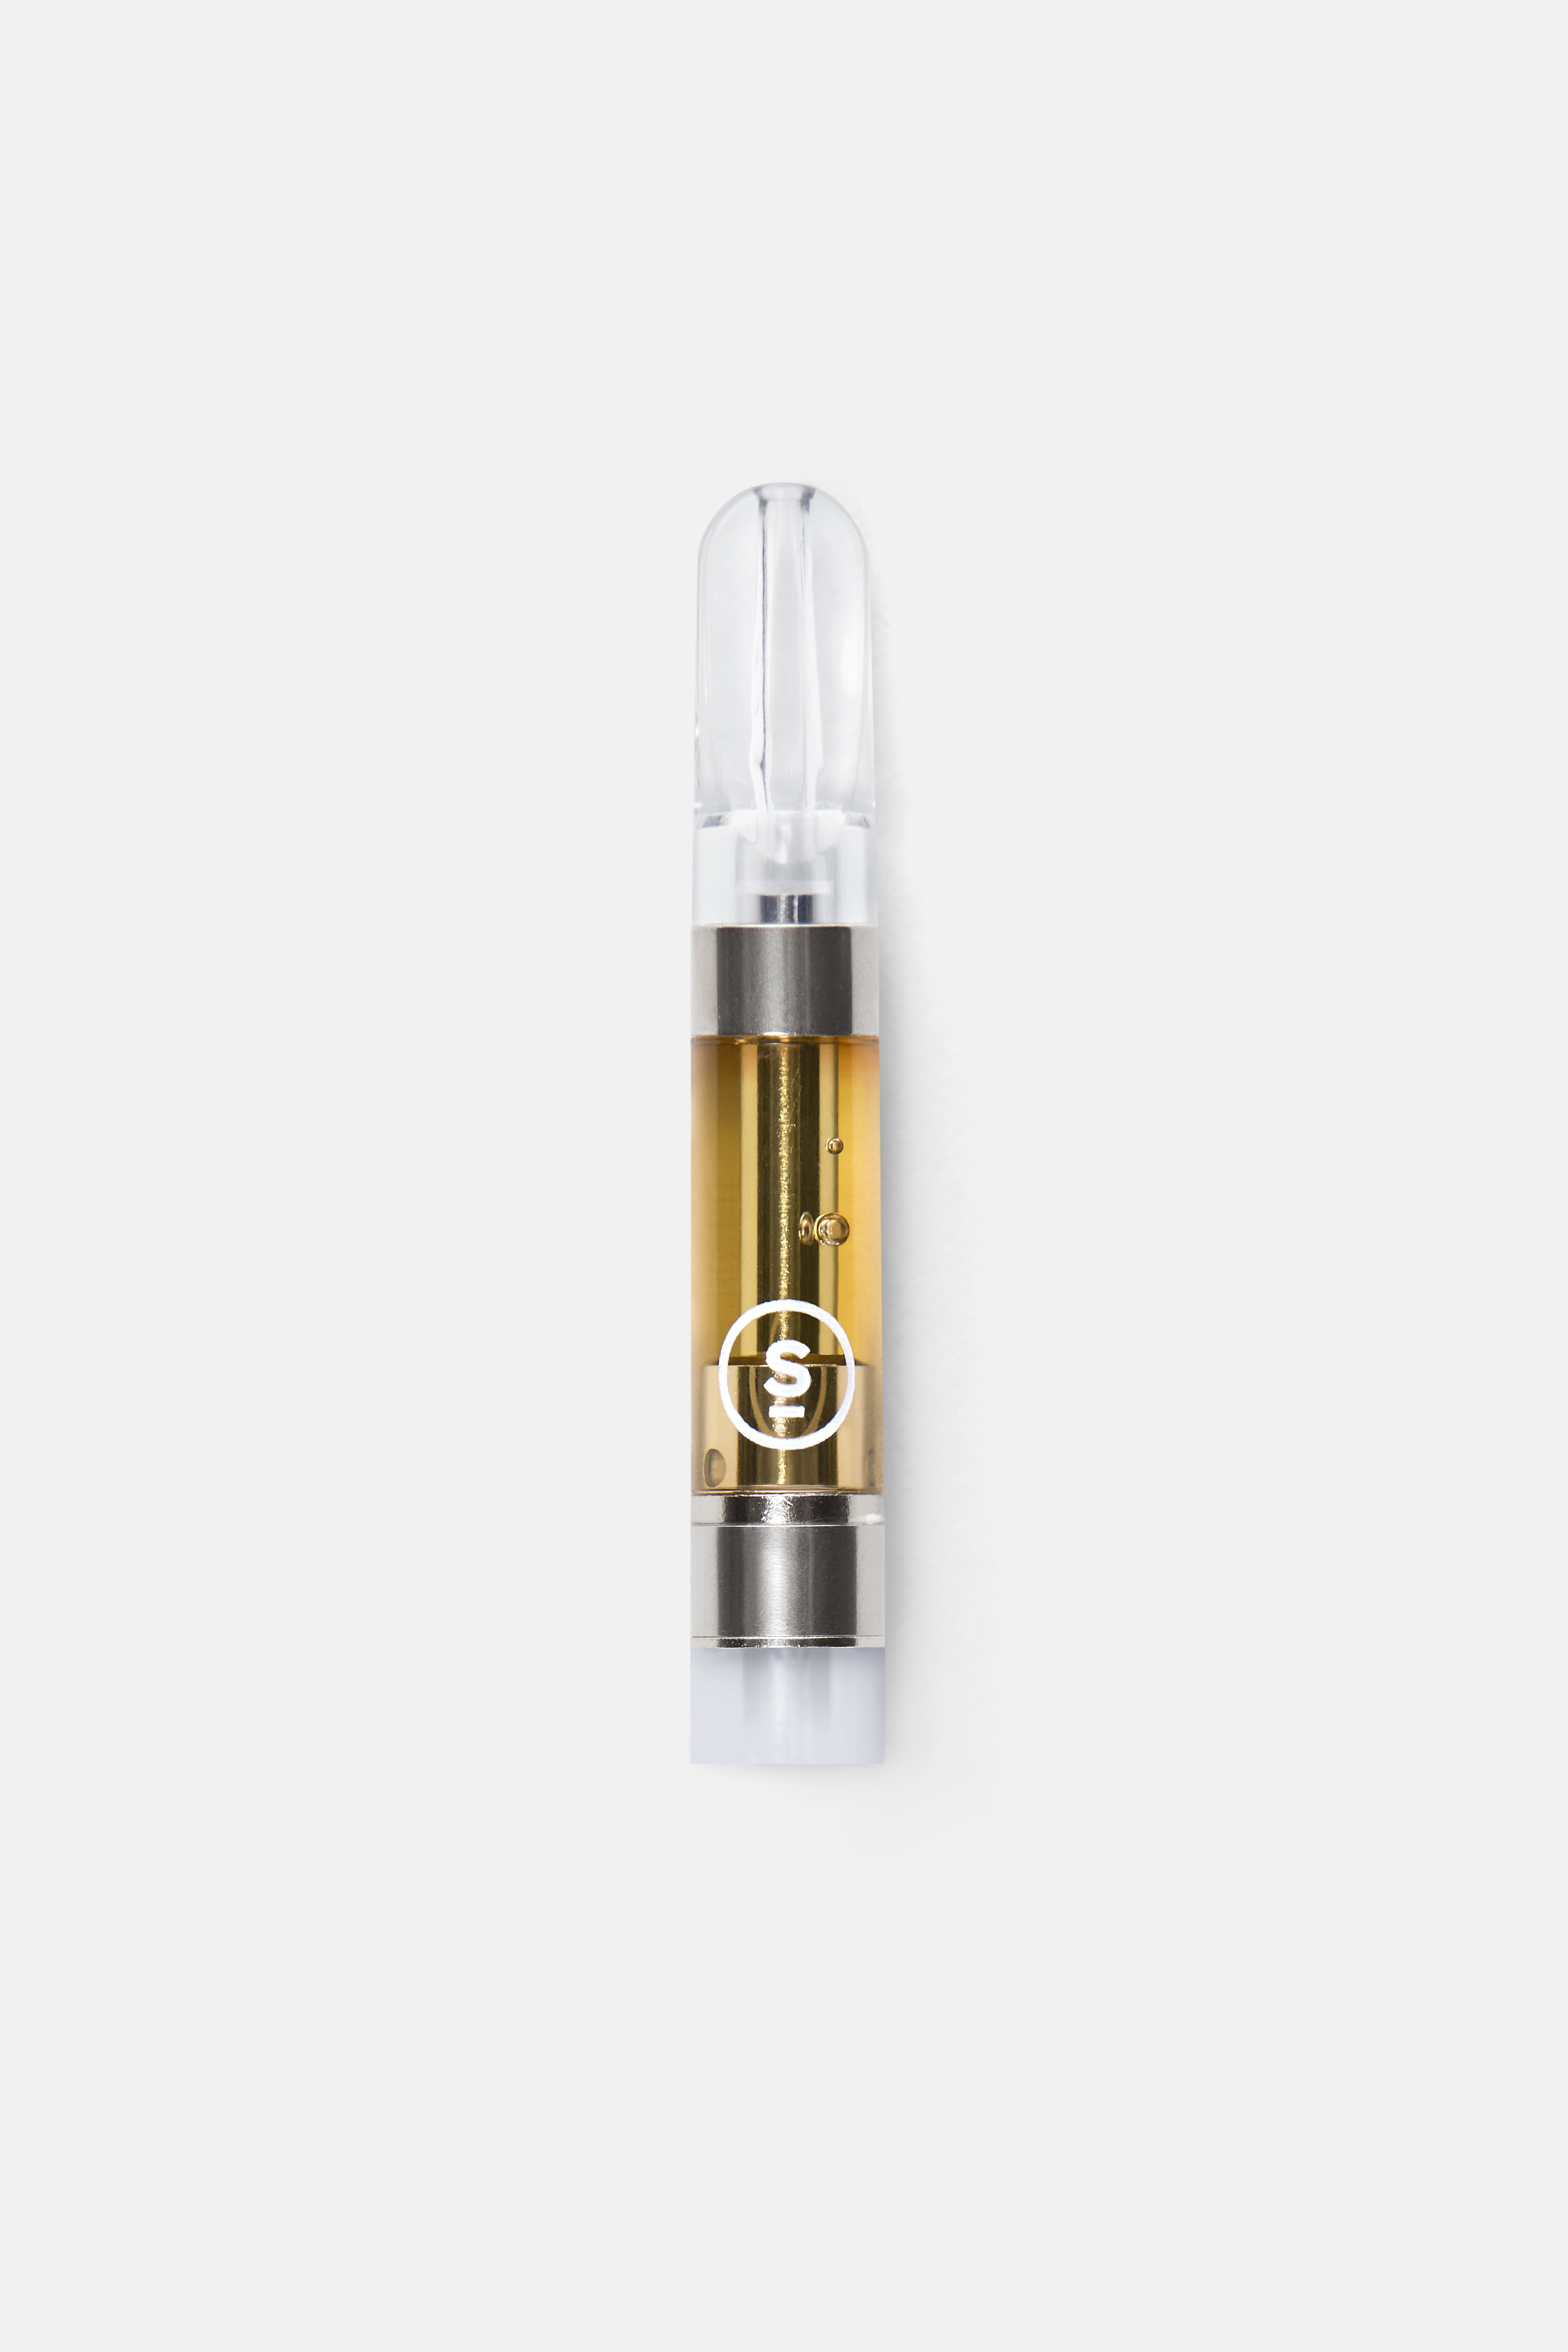 concentrate-acapulco-gold-select-vapes-1000mg